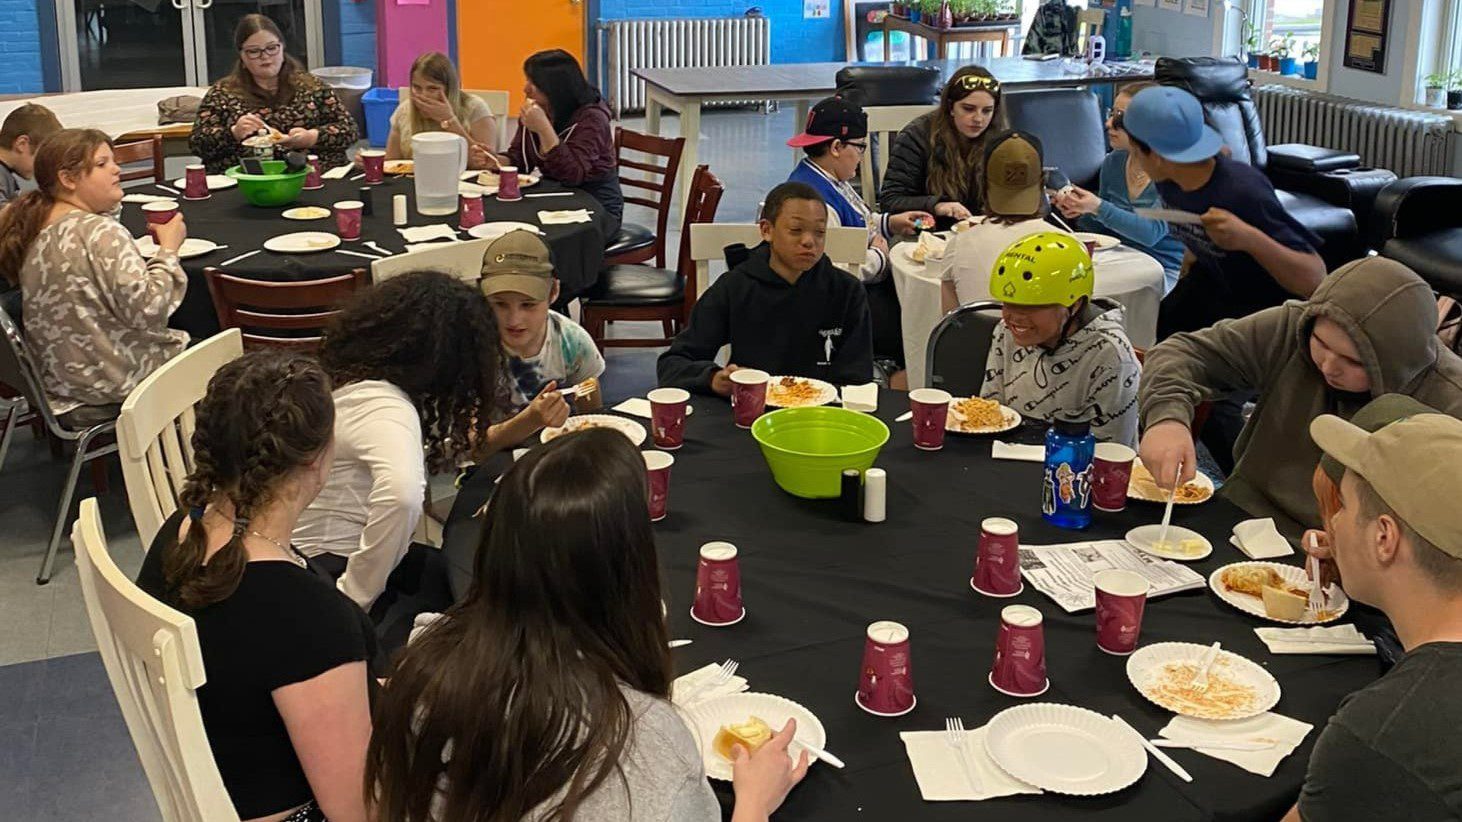 Groups of students sit around multiple tables to eat dinner